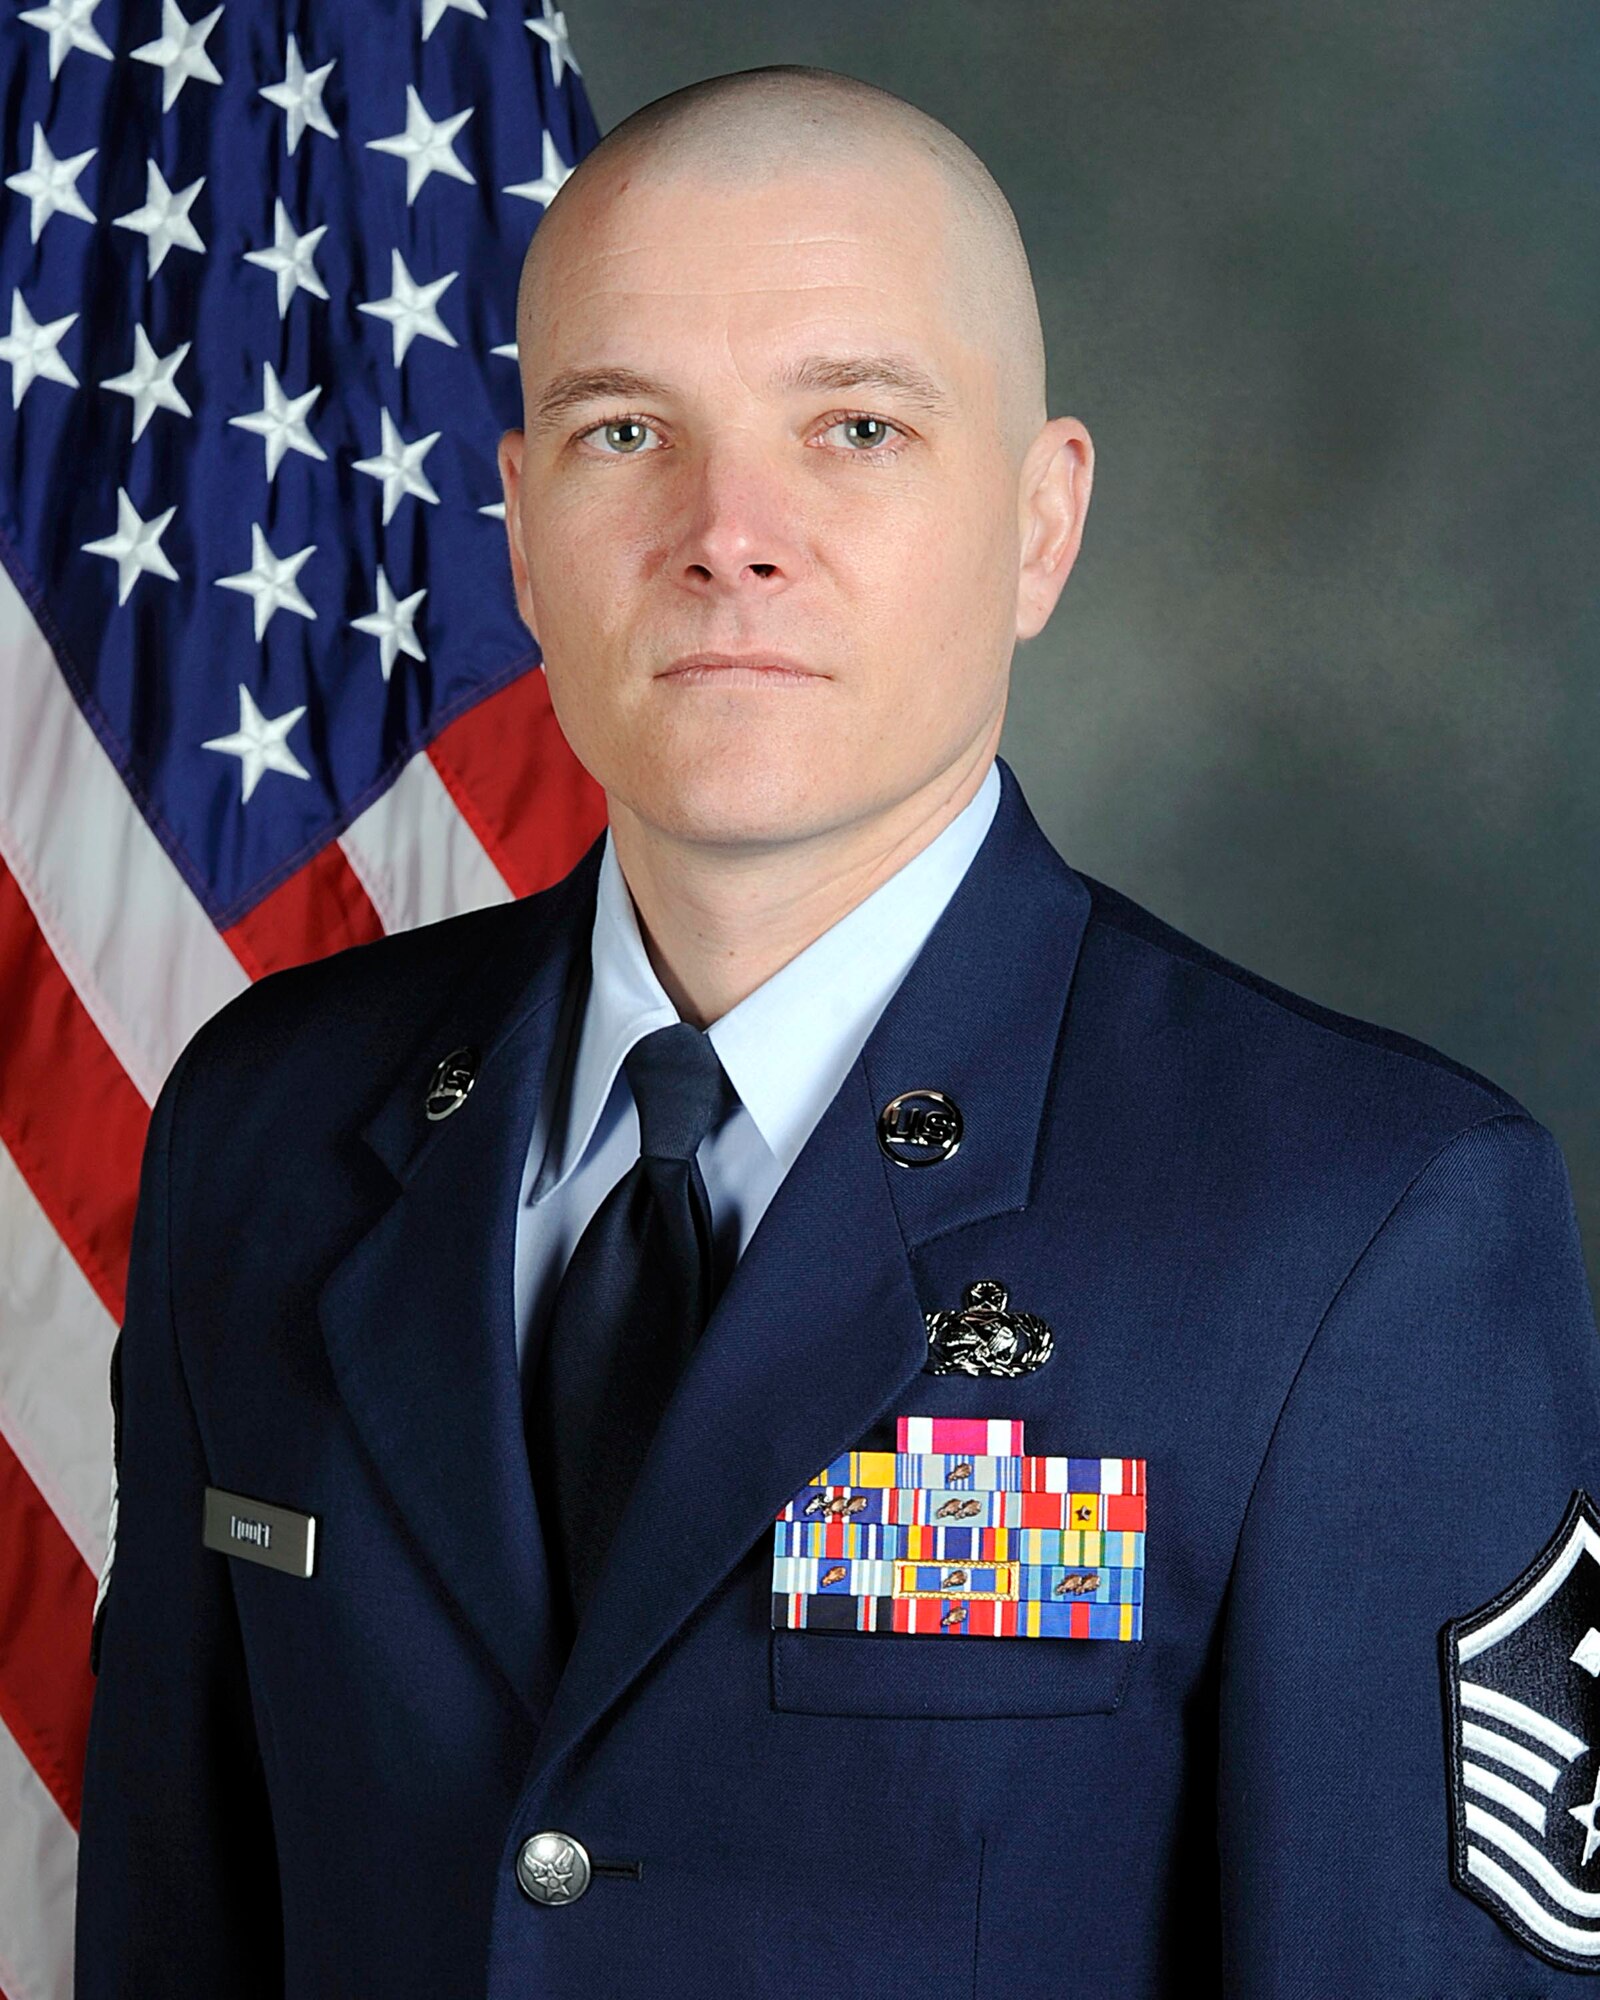 Master Sgt. Michael Moore Jr., from the 92nd Security Forces Squadron at Fairchild Air Force Base, Wash., was named the 2010 Air Mobility Command First Sergeant of the Year.  According to his award information, in 2010 he deployed to Kandahar Airfield, Afghanistan, on a joint expeditionary tasking in support of Operation Enduring Freedom. During his deployment Sergeant Moore was “responsible for the morale and welfare of 825 warriors spanning 88 Air Force specialty codes across 54 forward operating bases.” He established personnel programs that were replicated across the theater and his leadership “led to his selection as the 92nd Air Refueling Wing’s Lance P. Sijan Award nominee” for 2010. (U.S. Air Force Photo)

